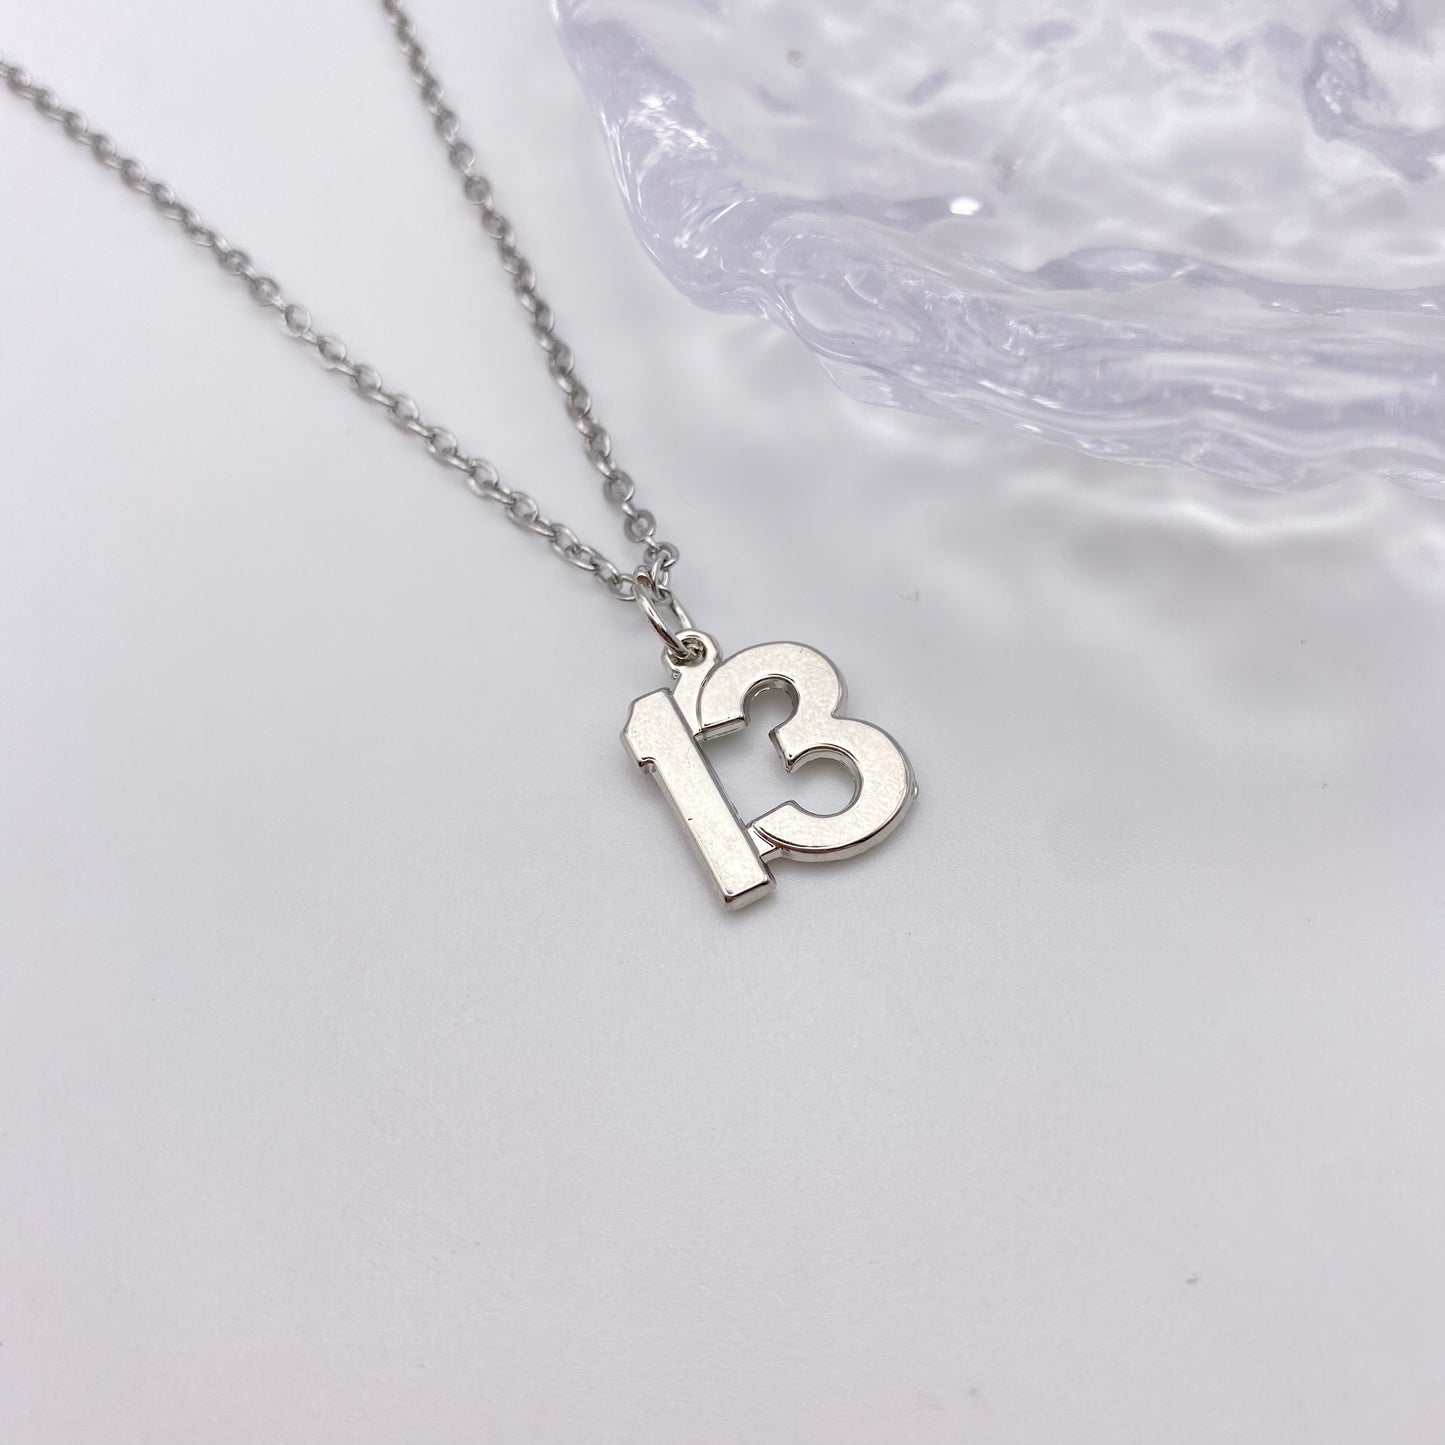 13 Number Necklace